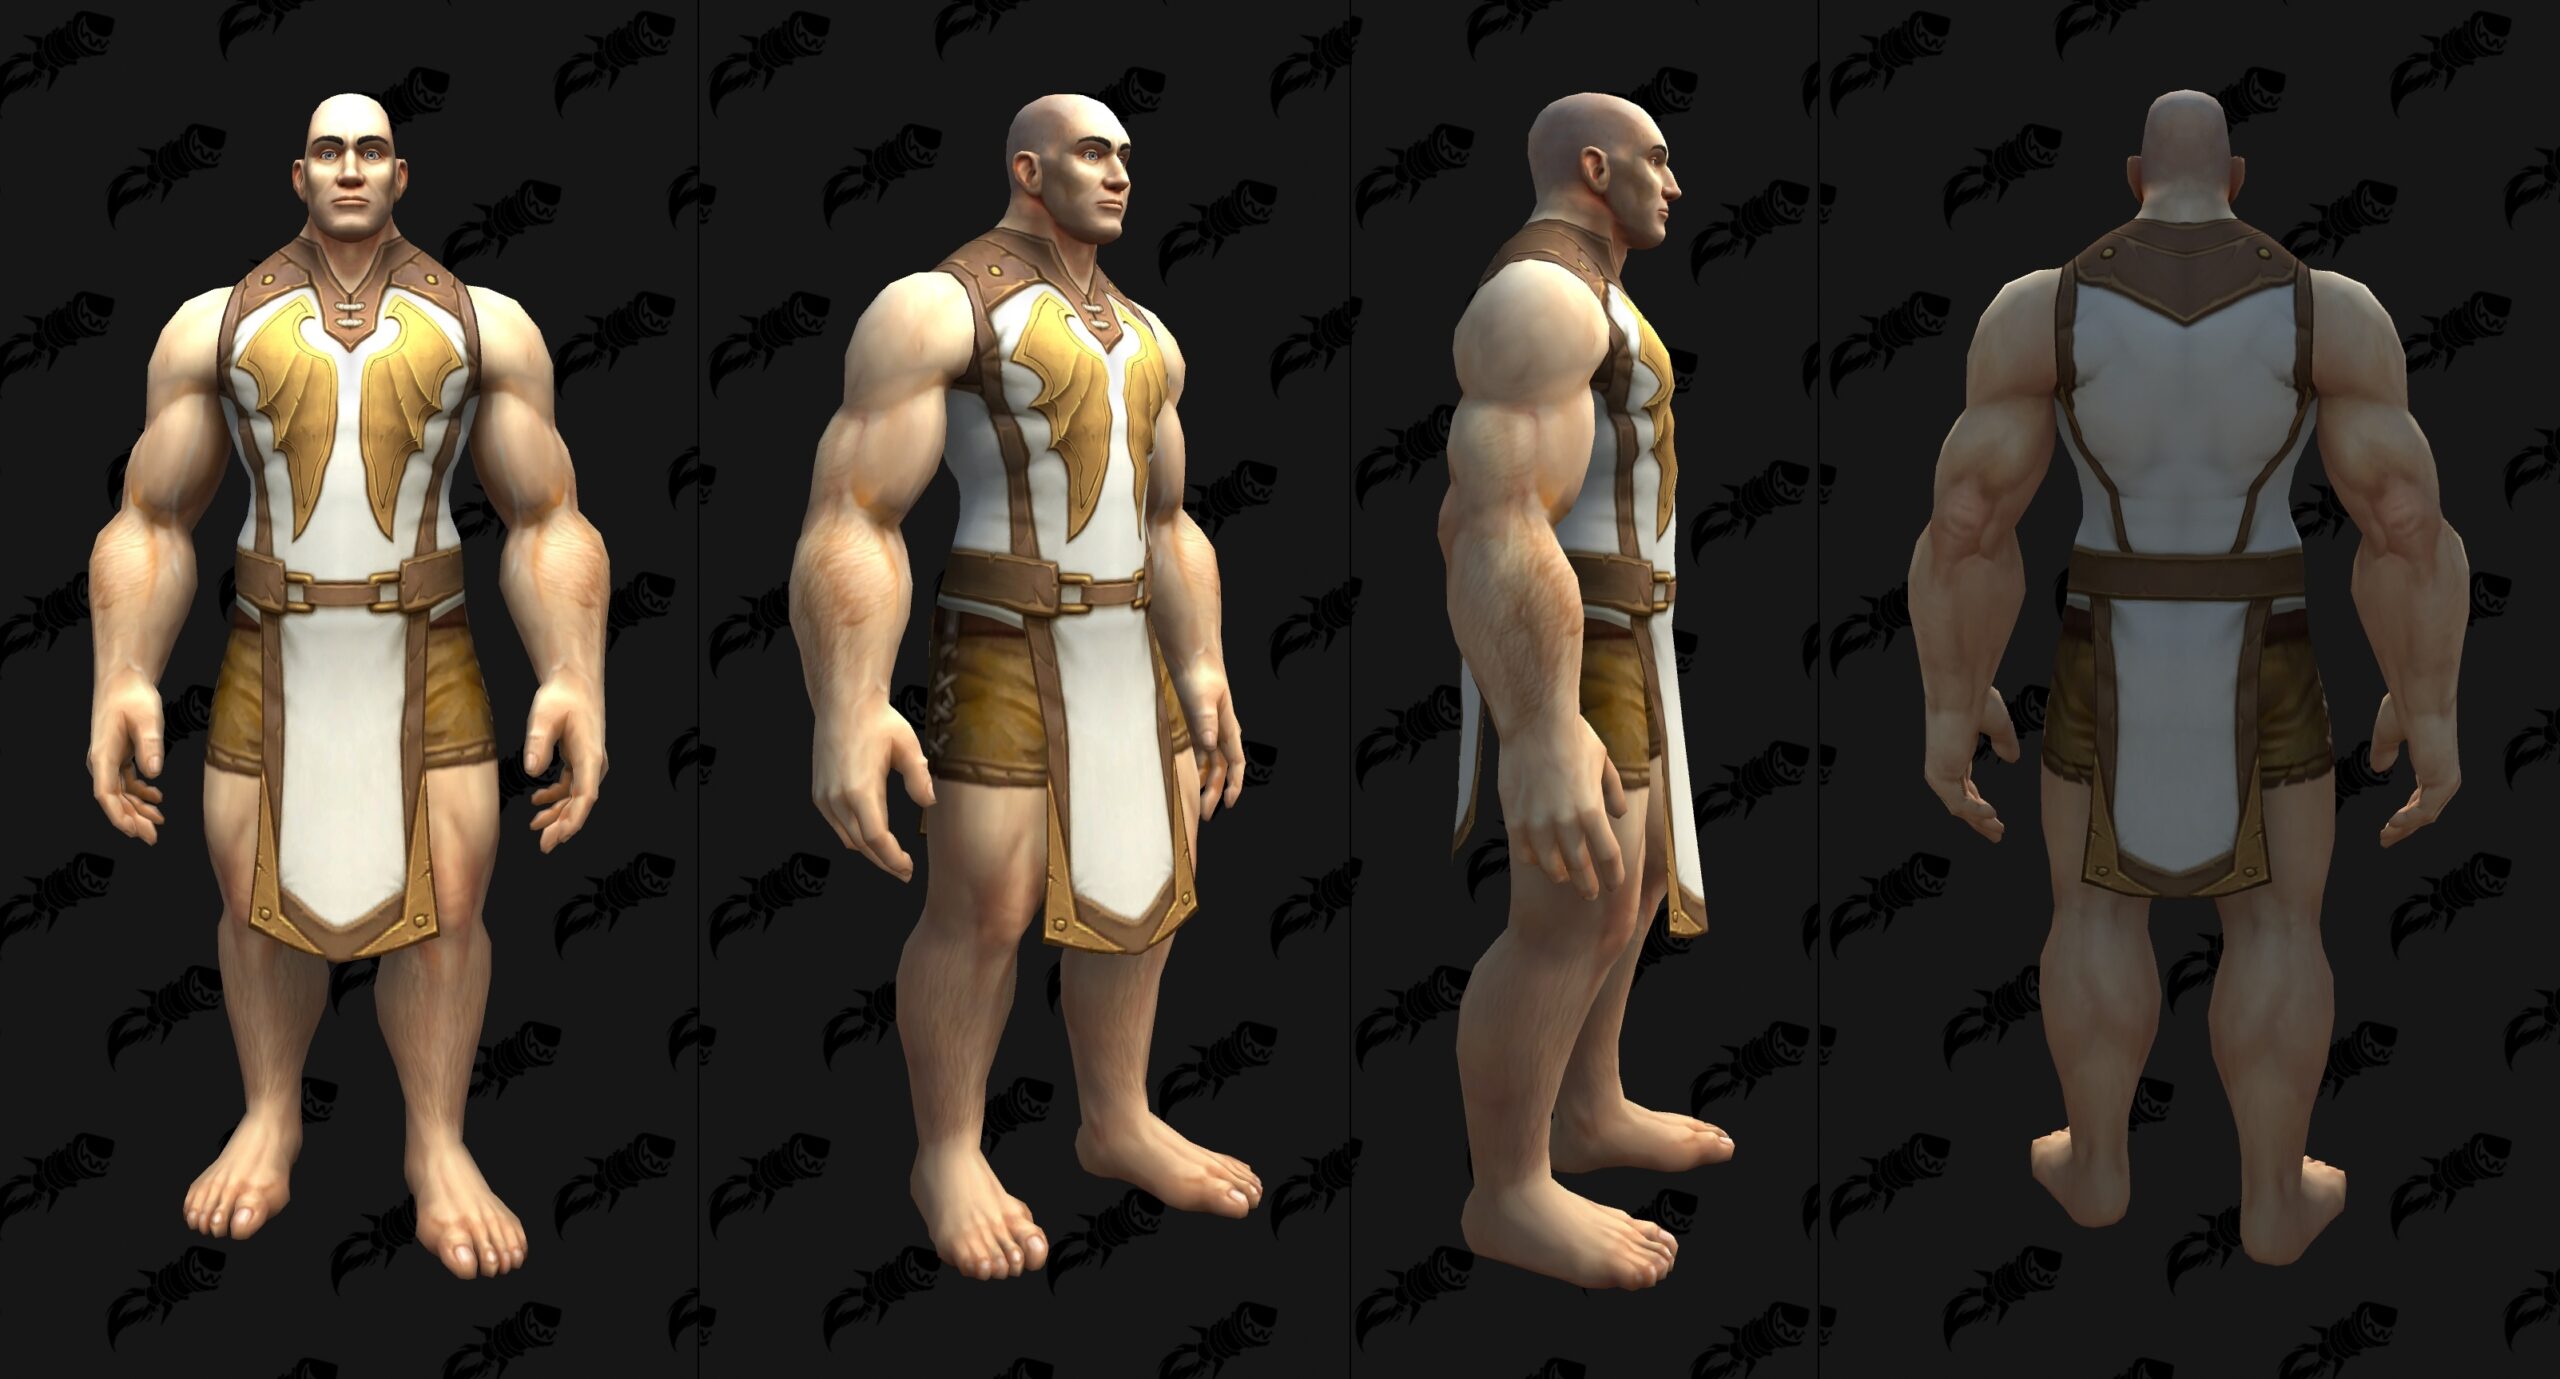 Riders of Azeroth Tabard scaled